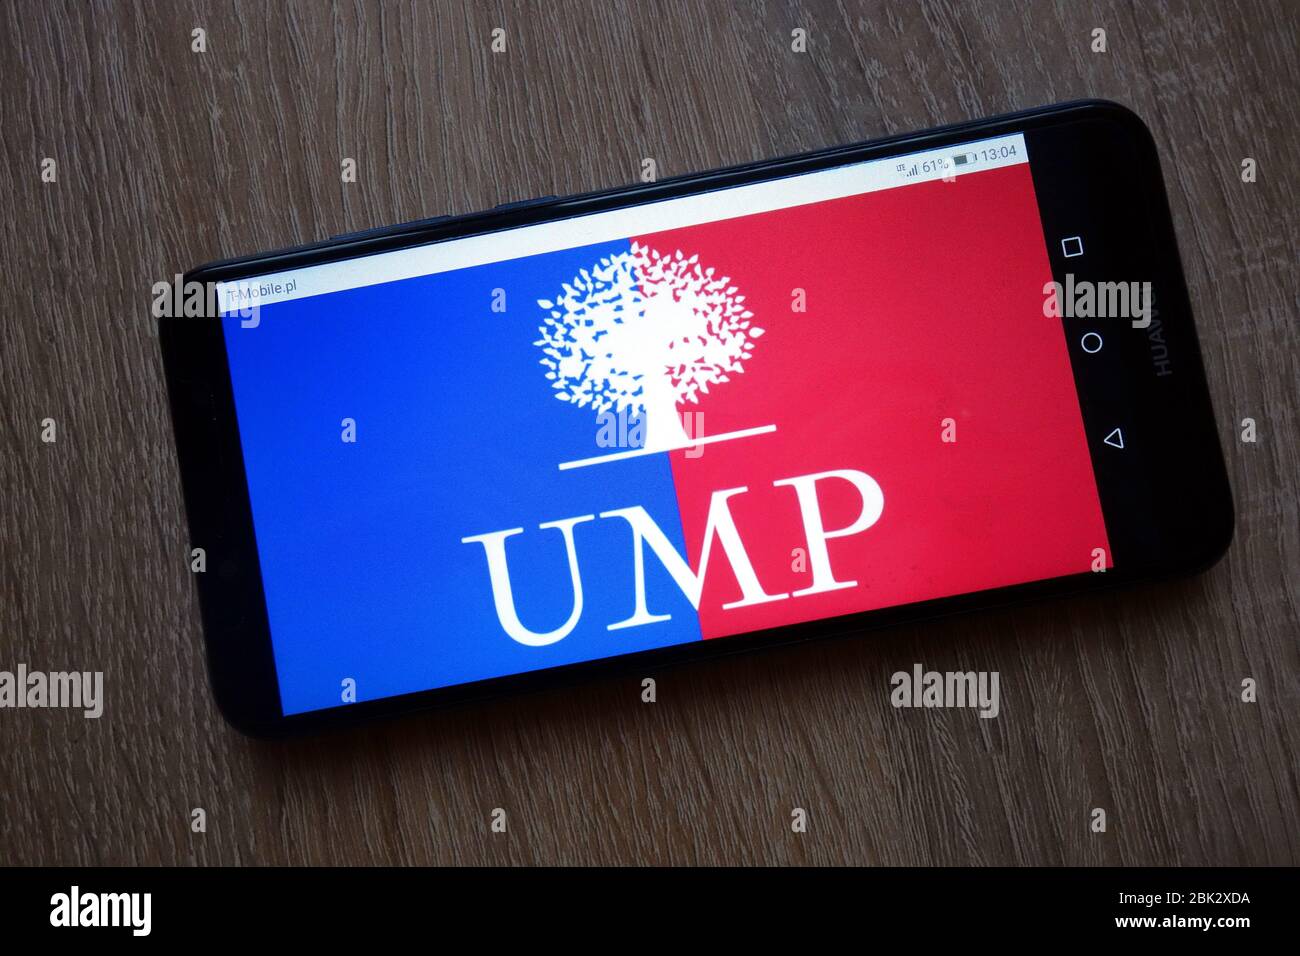 The Union for a Popular Movement (French: Union pour un mouvement populaire) party logo displayed on smartphone Stock Photo